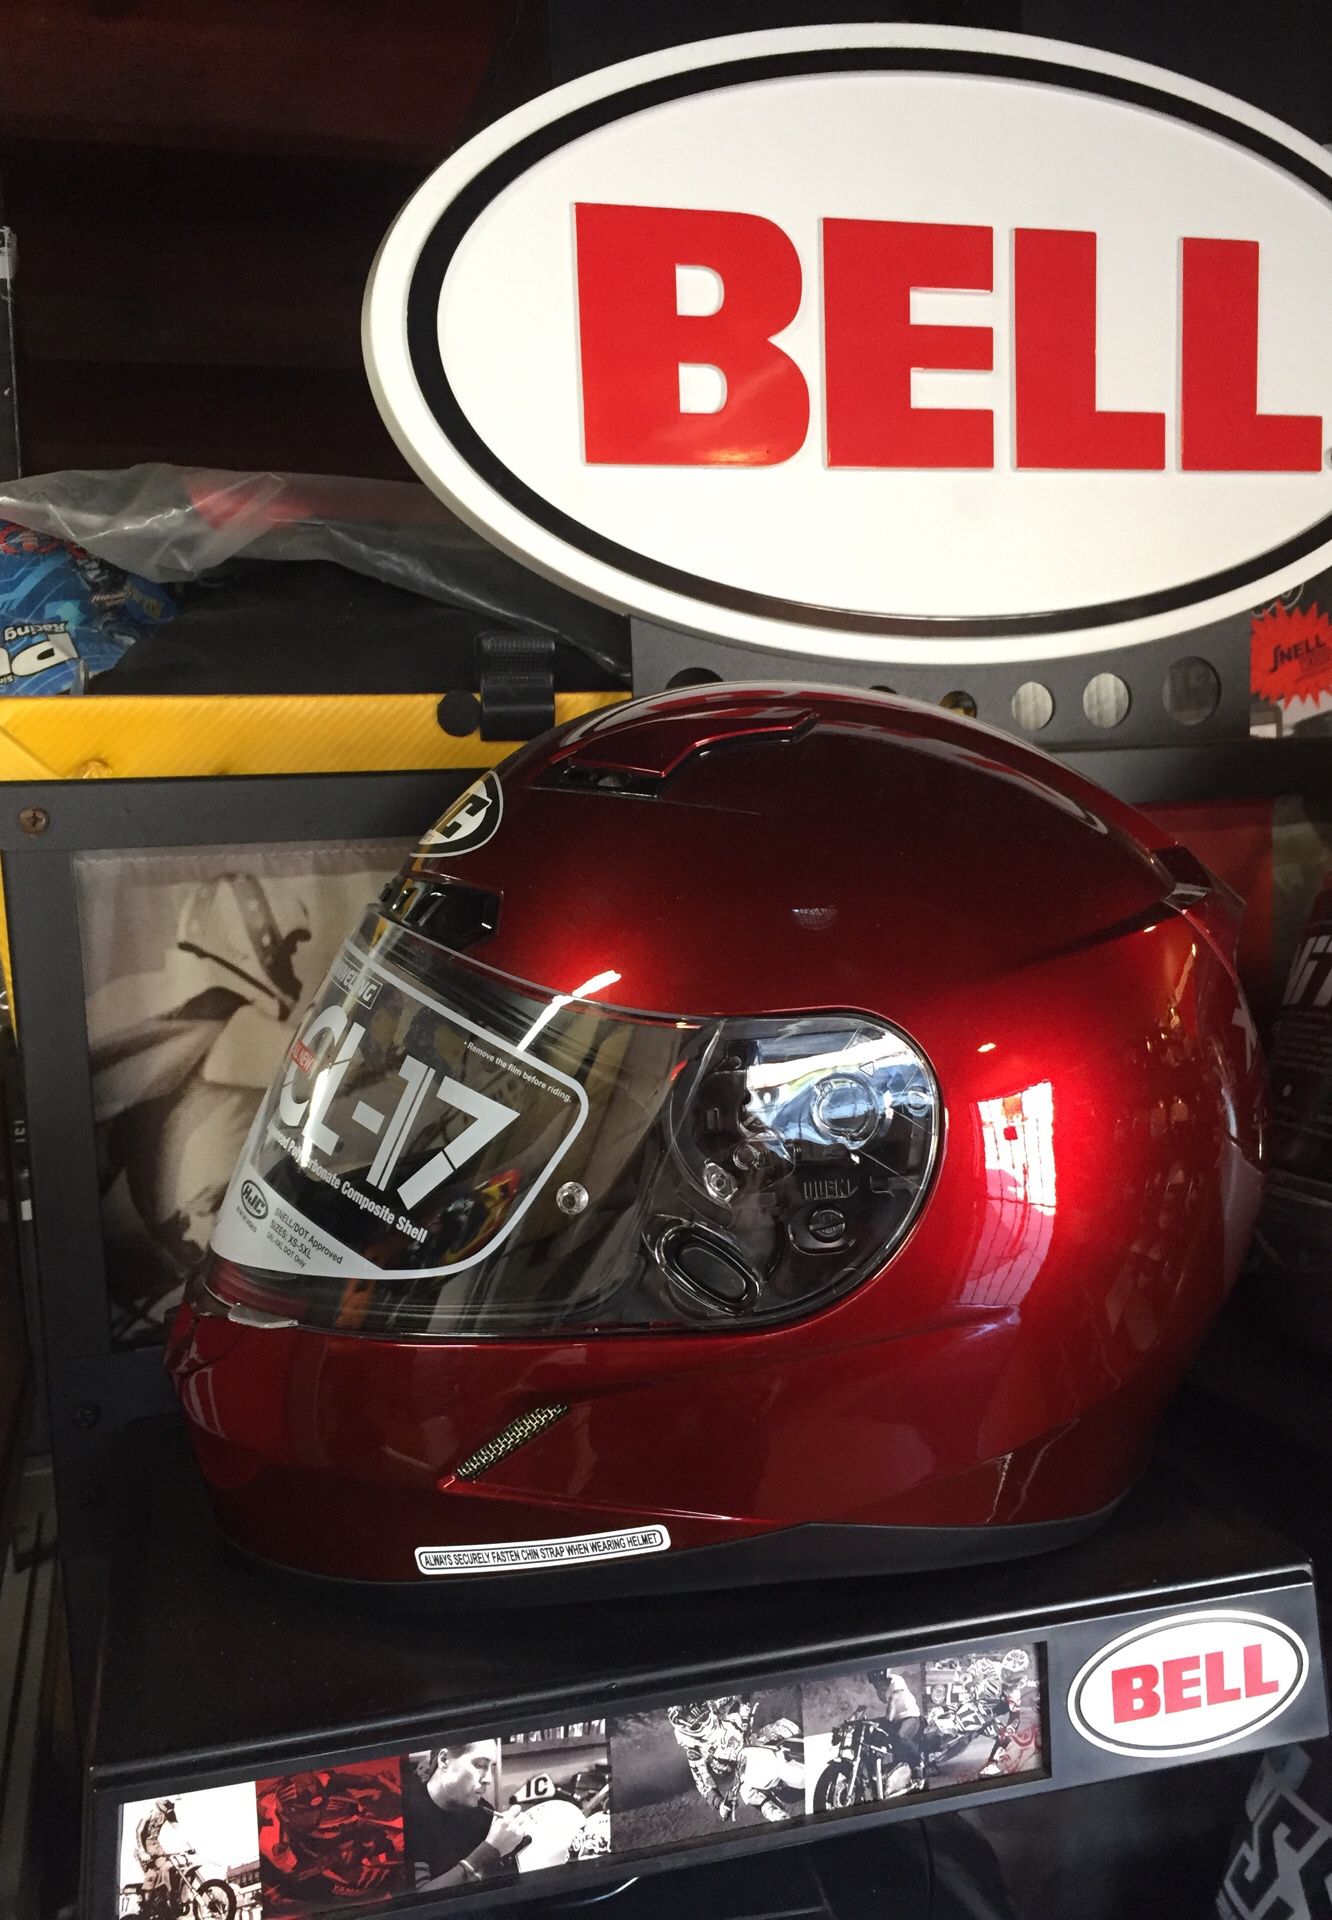 New candy red wine dot snell Motorcycle Helmet $130